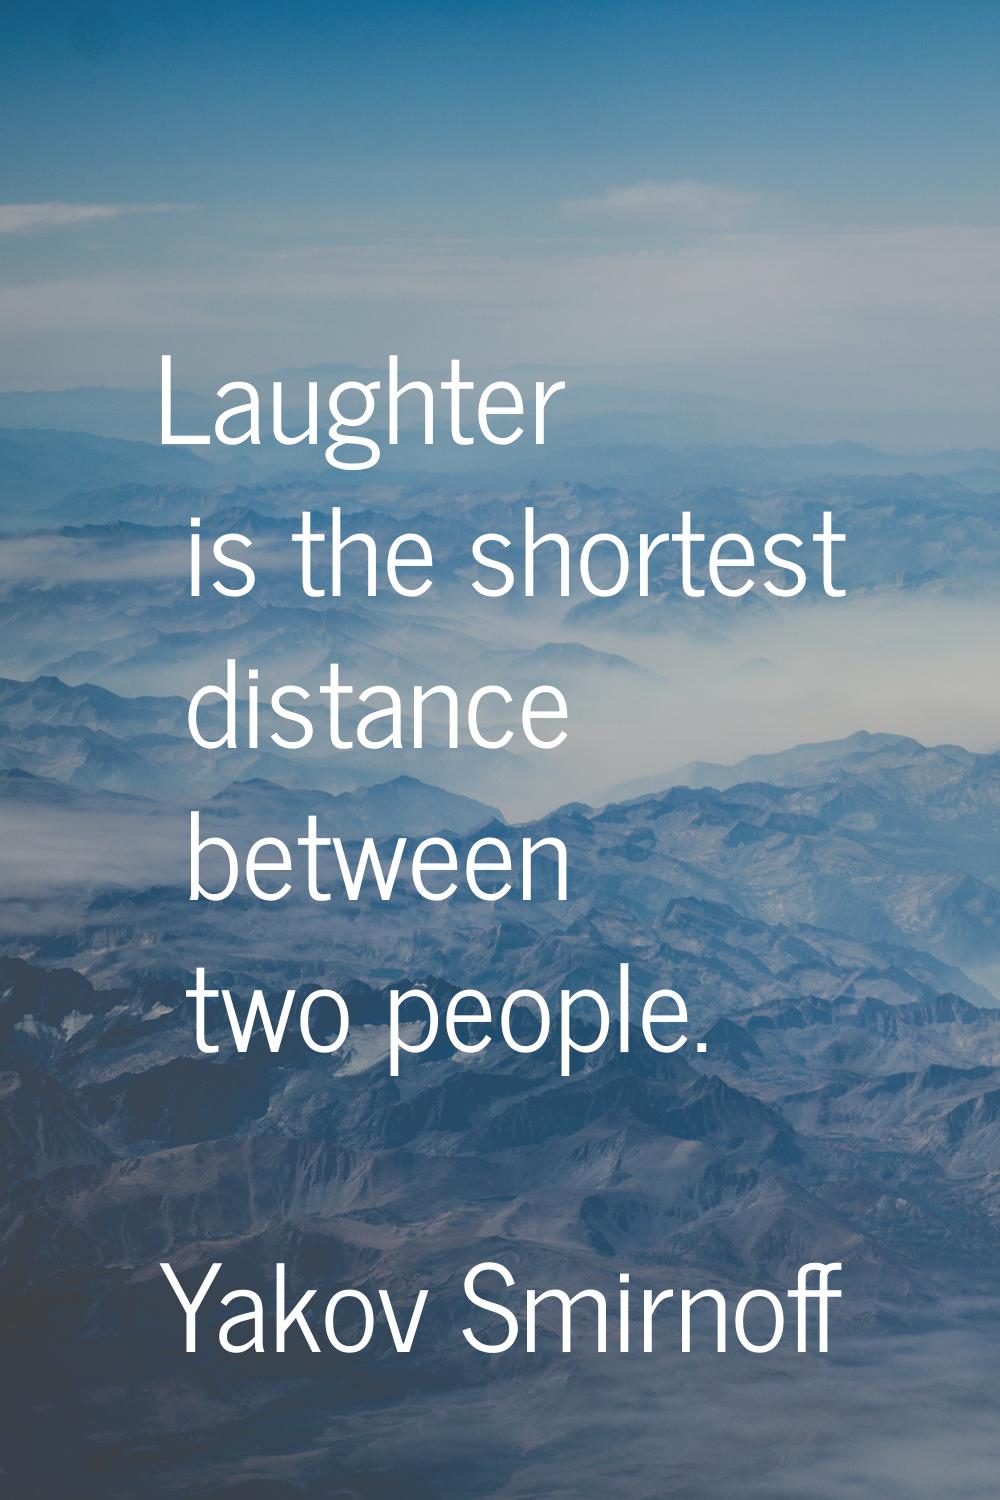 Laughter is the shortest distance between two people.